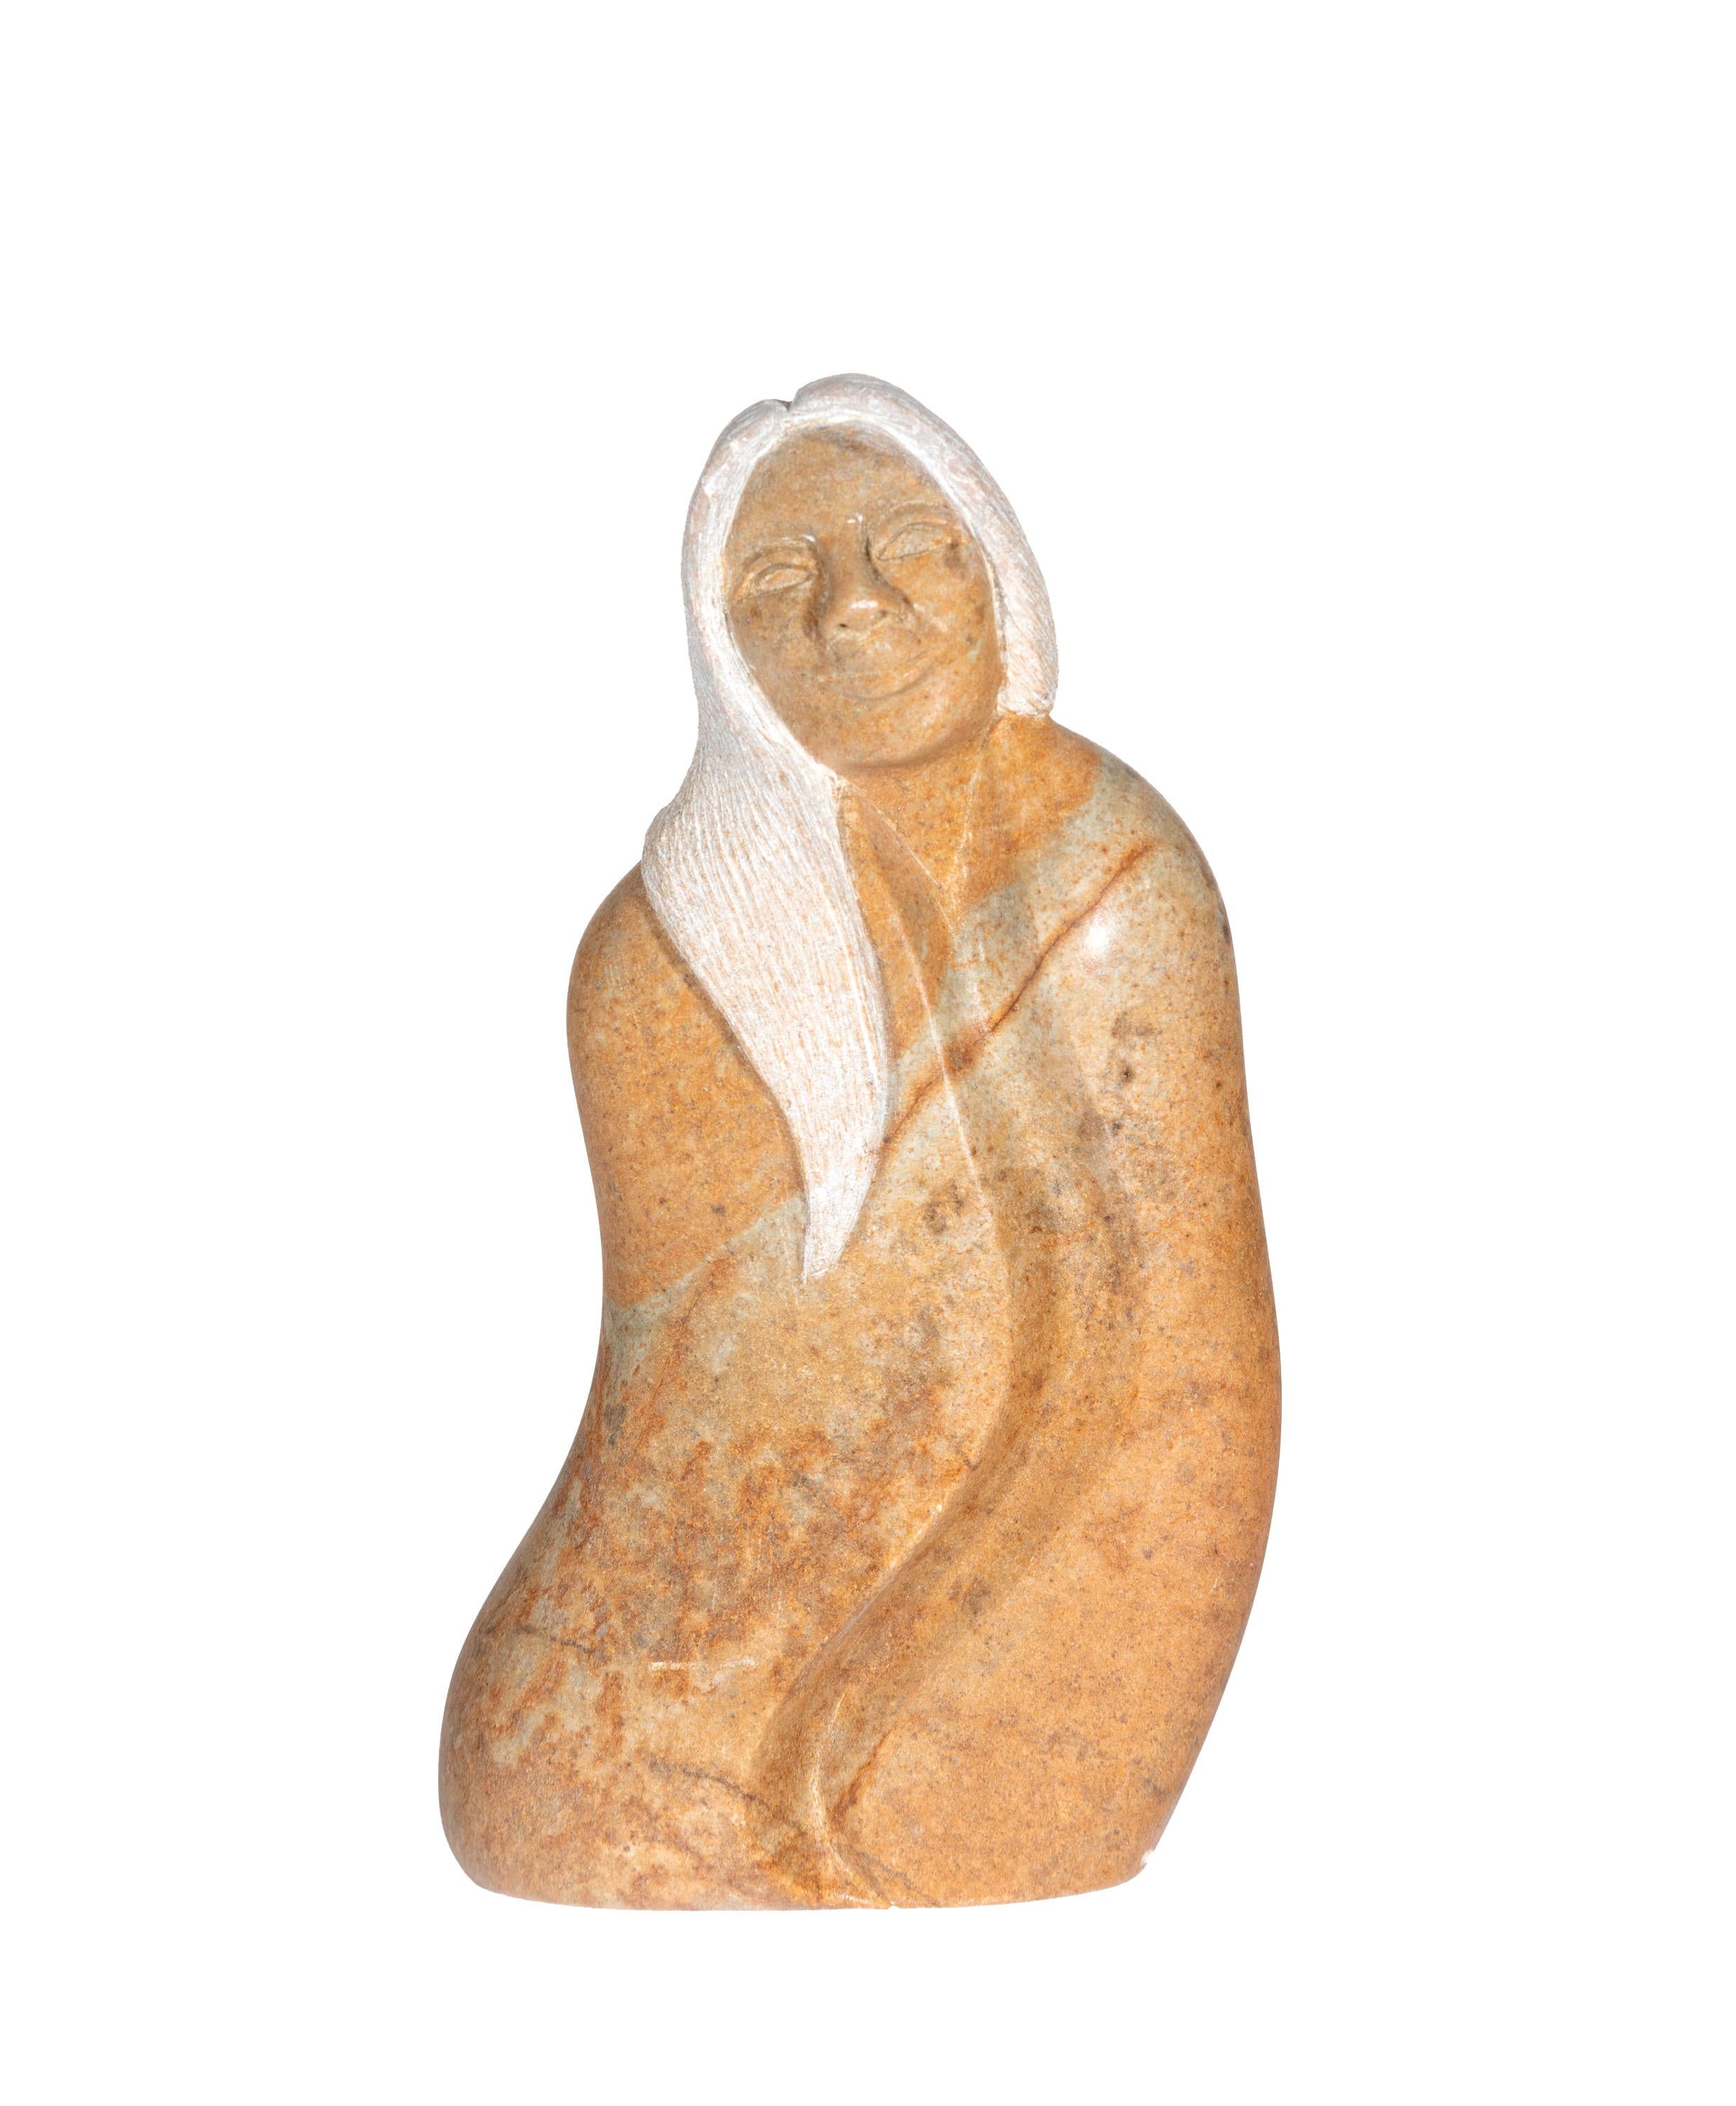 Loreene Henry Figurative Sculpture - "Earth Sister, " Carved Yellow Brazilian Soapstone, Signed